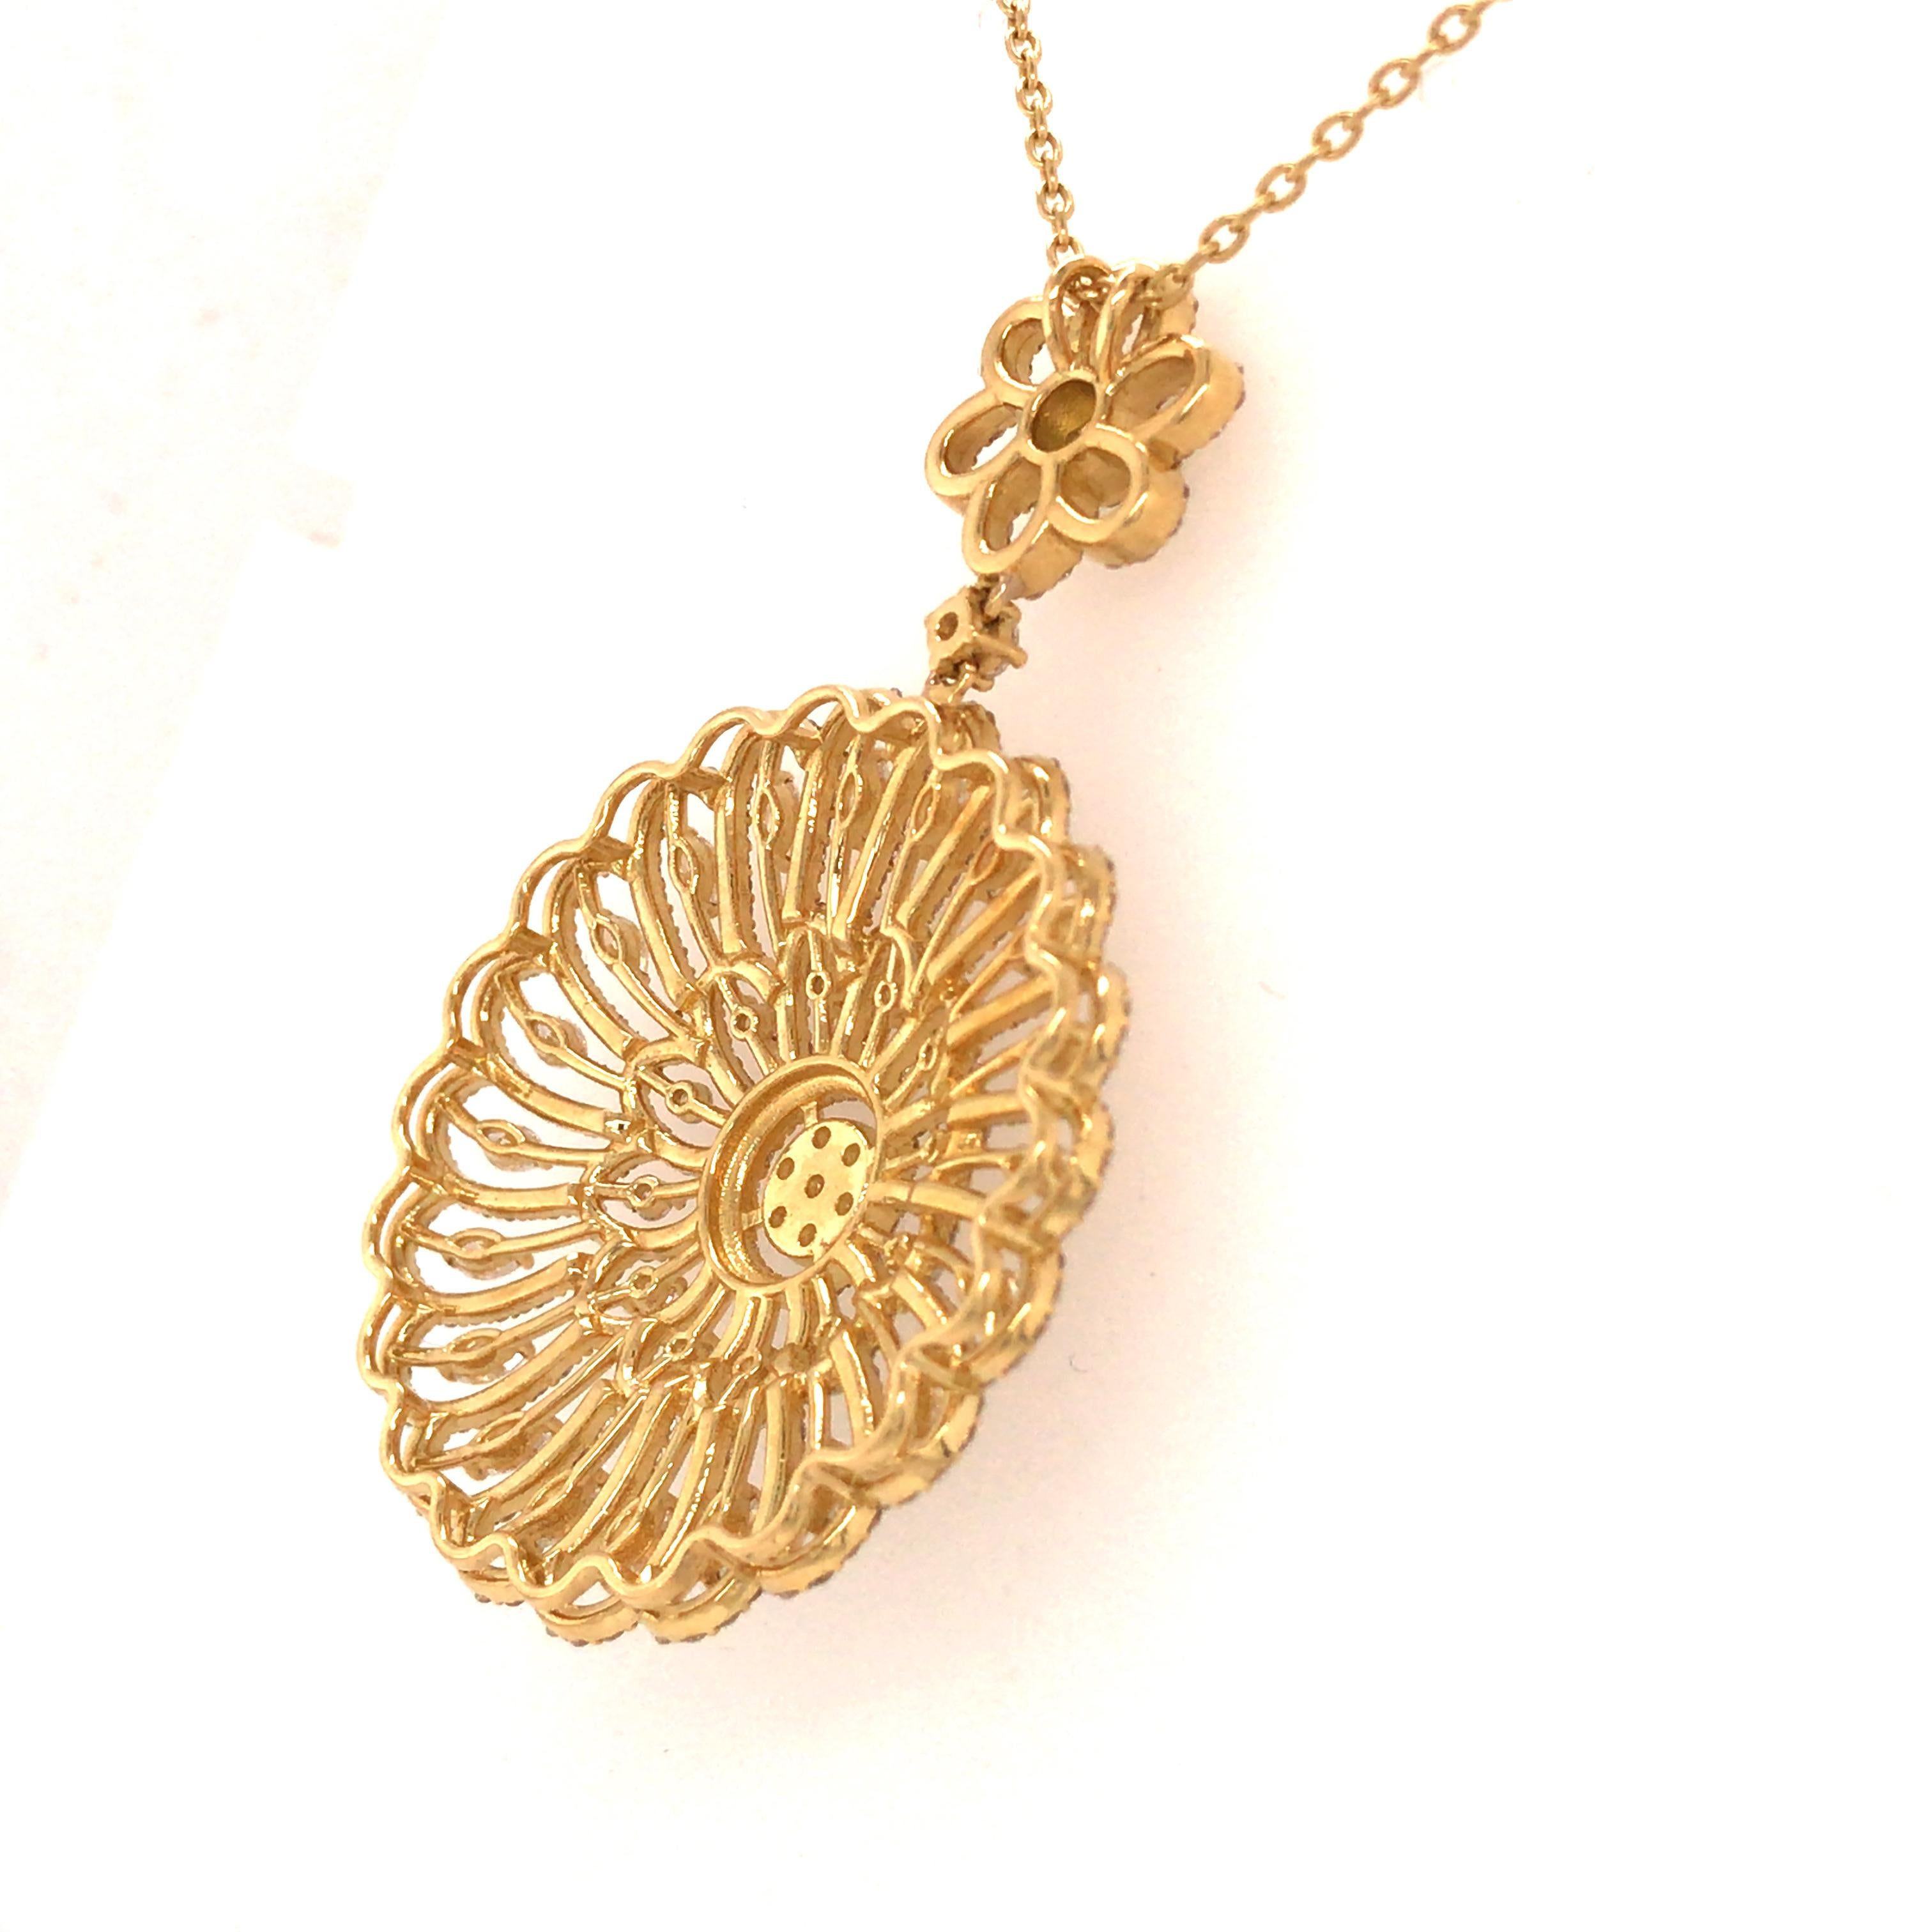 18K Diamond Flower and Drop Pendant on Diamond by The Yard Chain Yellow Gold In Good Condition For Sale In Boca Raton, FL